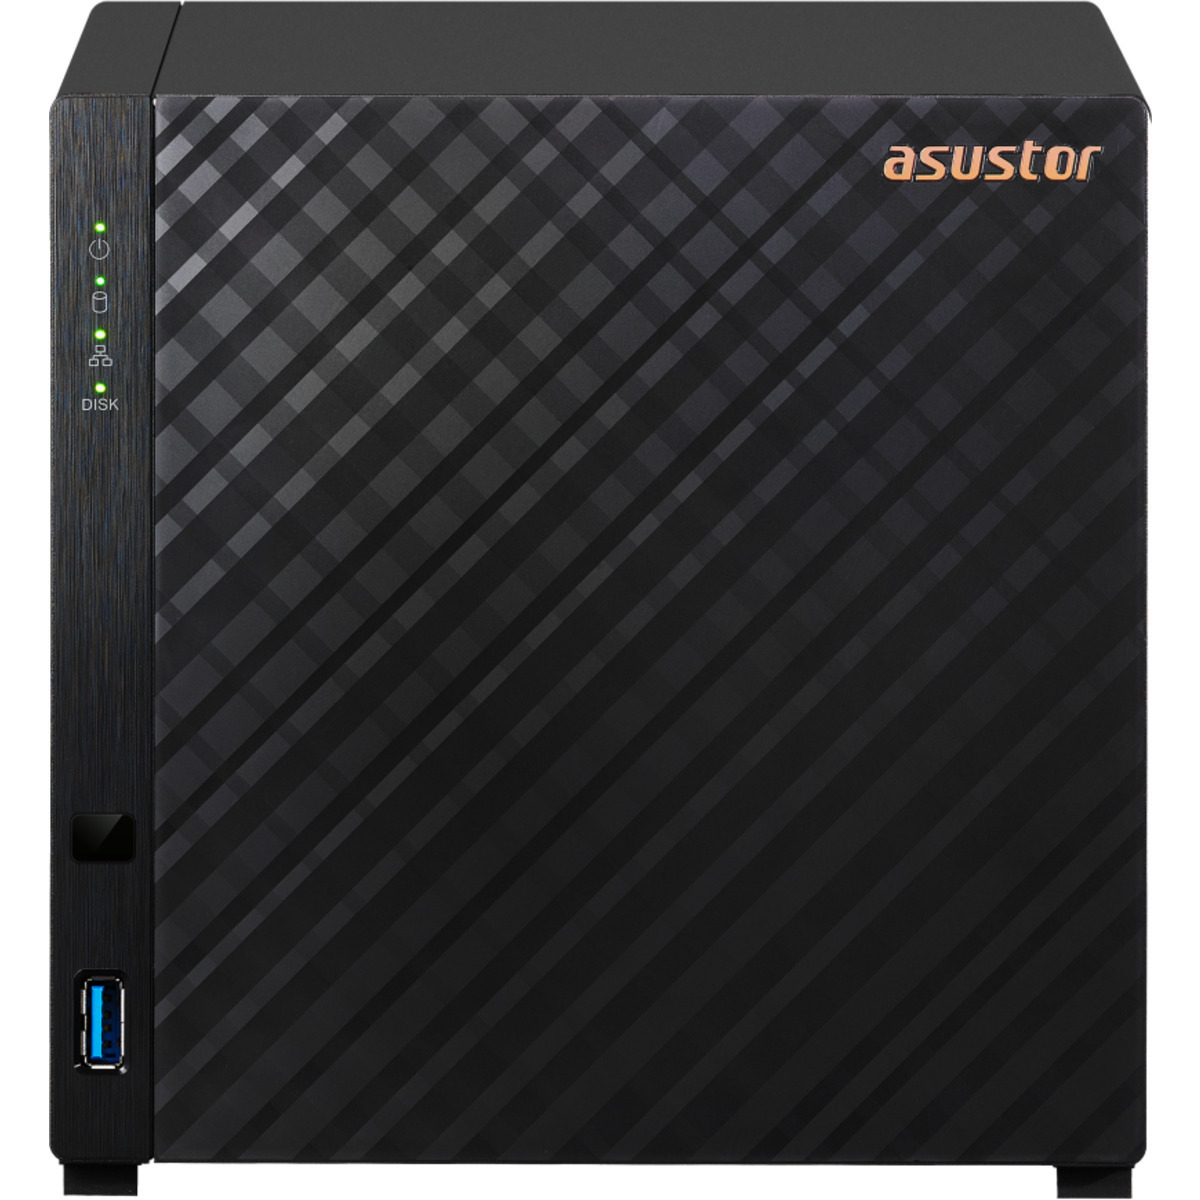 ASUSTOR DRIVESTOR 4 AS1104T 48tb 4-Bay Desktop Personal / Basic Home / Small Office NAS - Network Attached Storage Device 3x16tb Western Digital Ultrastar DC HC550 WUH721816ALE6L4 3.5 7200rpm SATA 6Gb/s HDD ENTERPRISE Class Drives Installed - Burn-In Tested DRIVESTOR 4 AS1104T